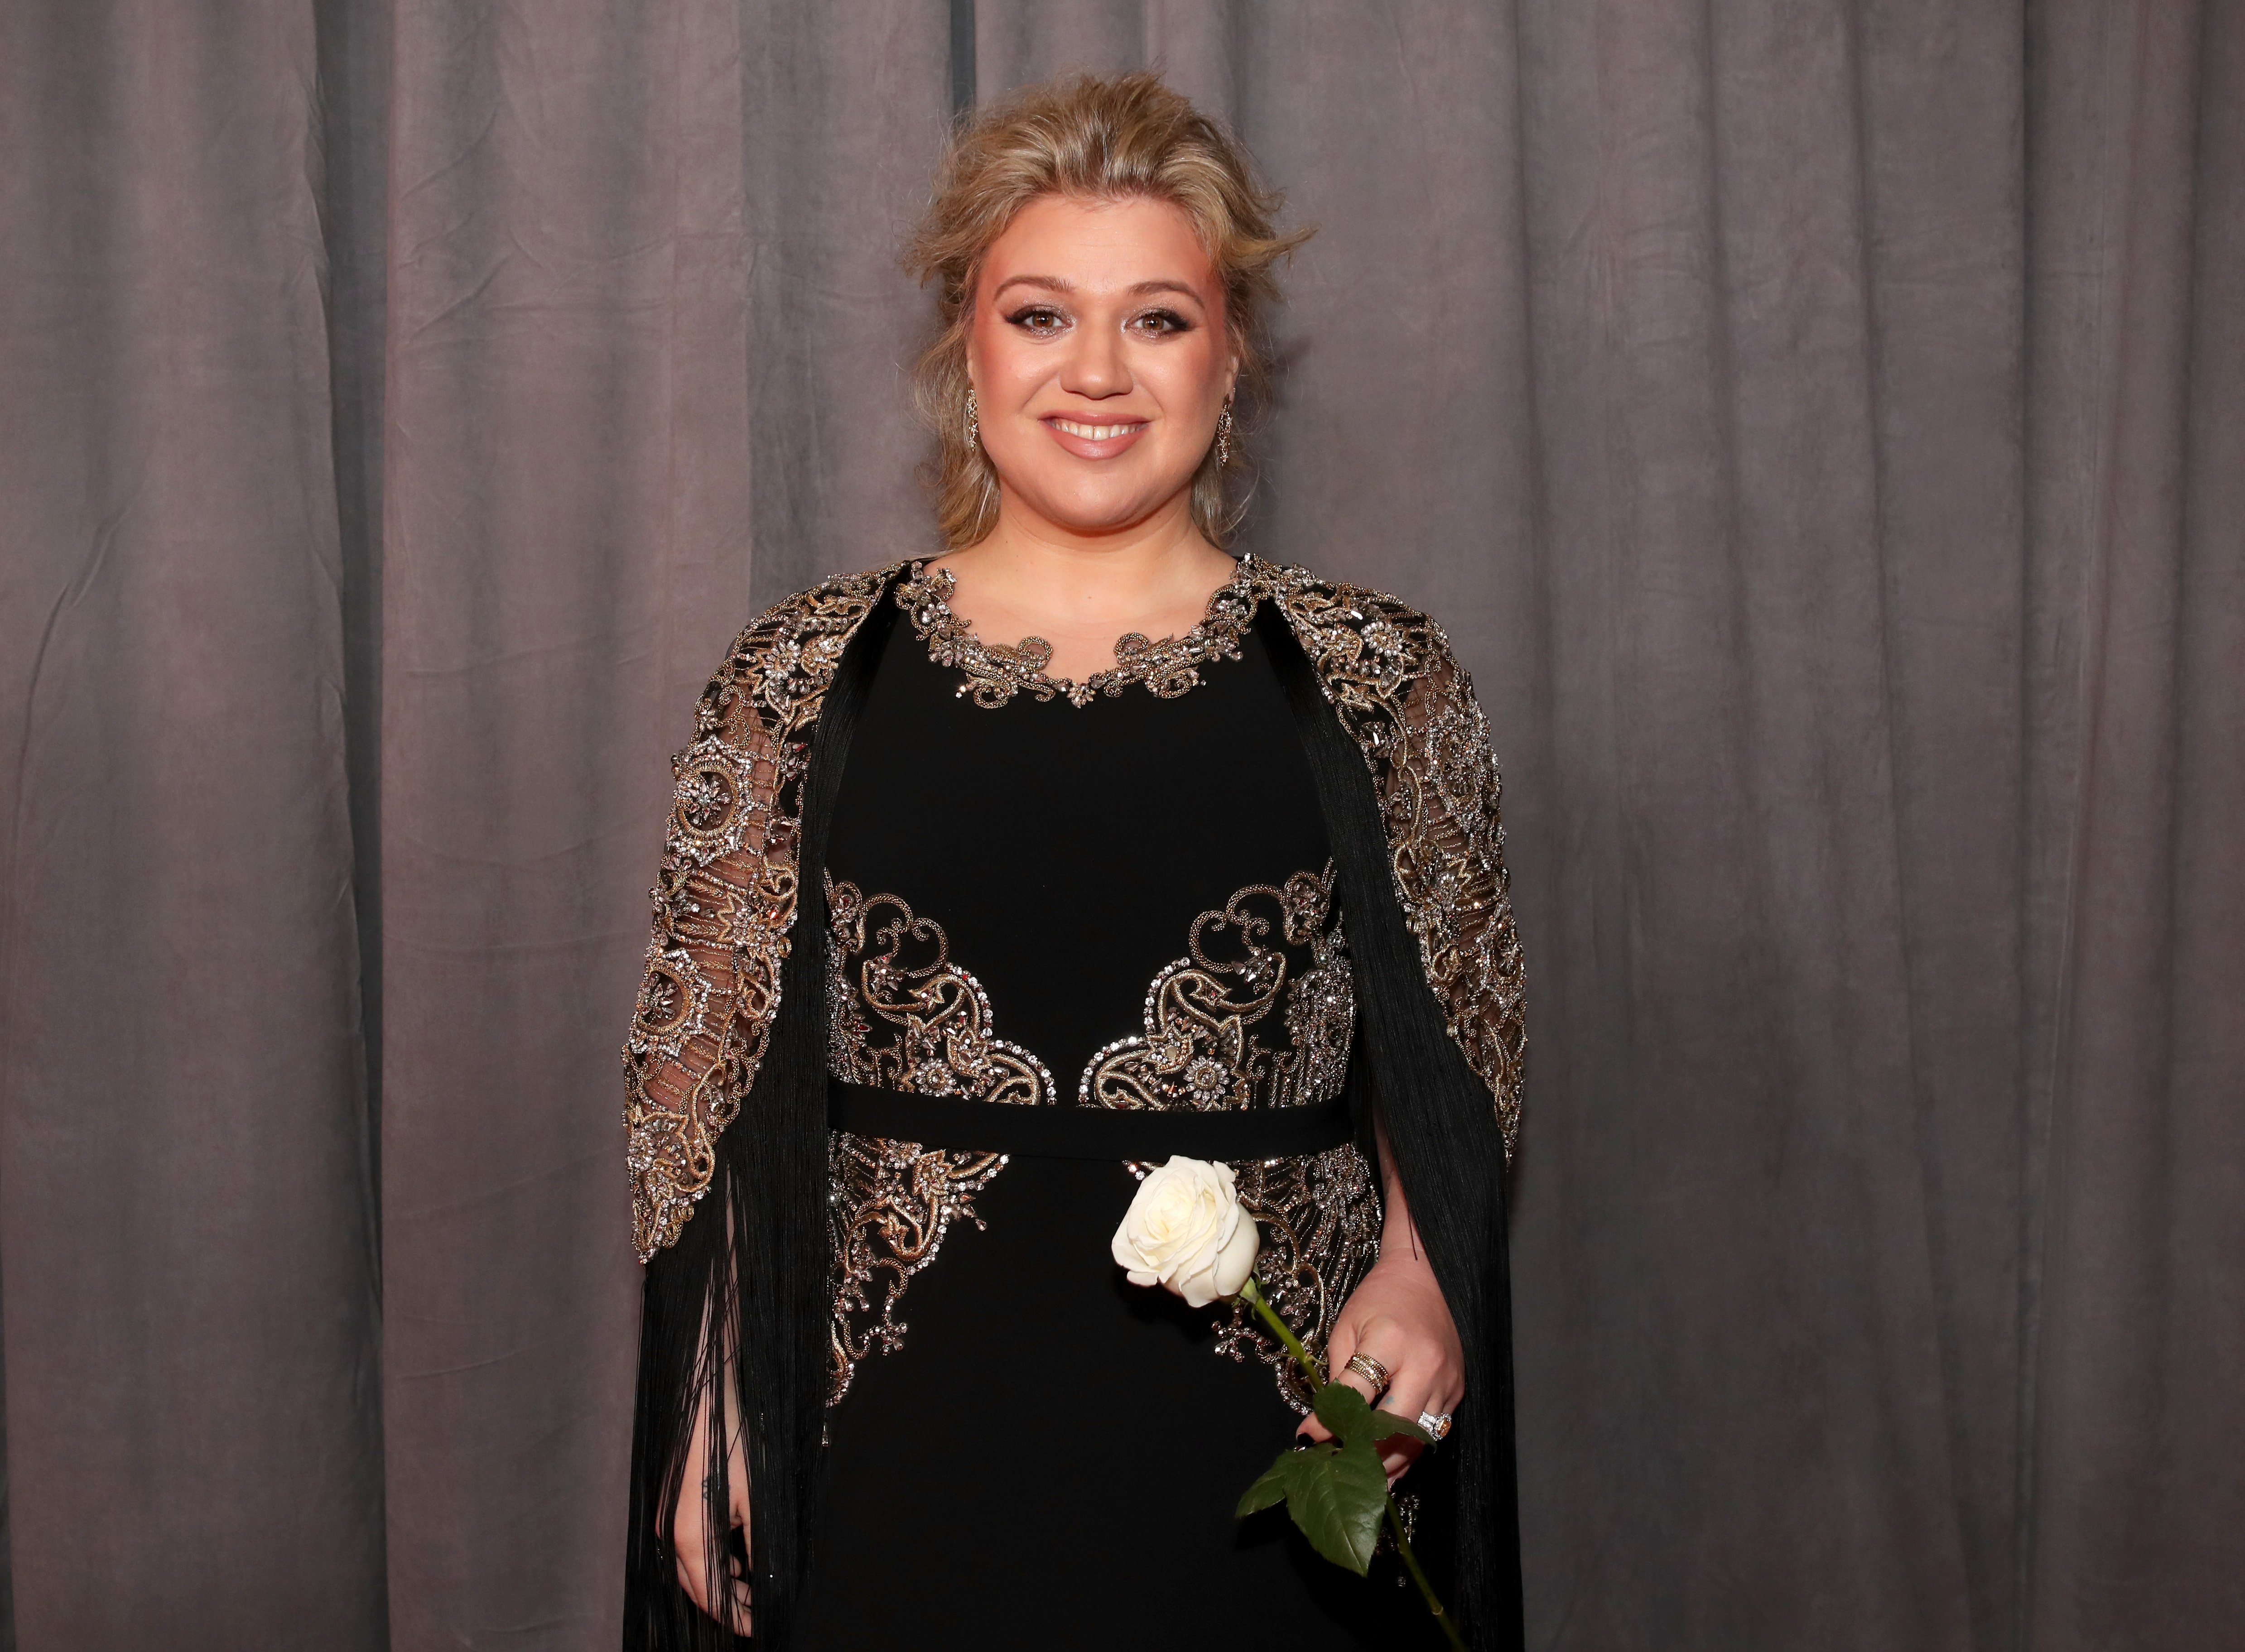 Kelly Clarkson at The Grammy Awards in New York, January 2018. | Photo: Getty Images.